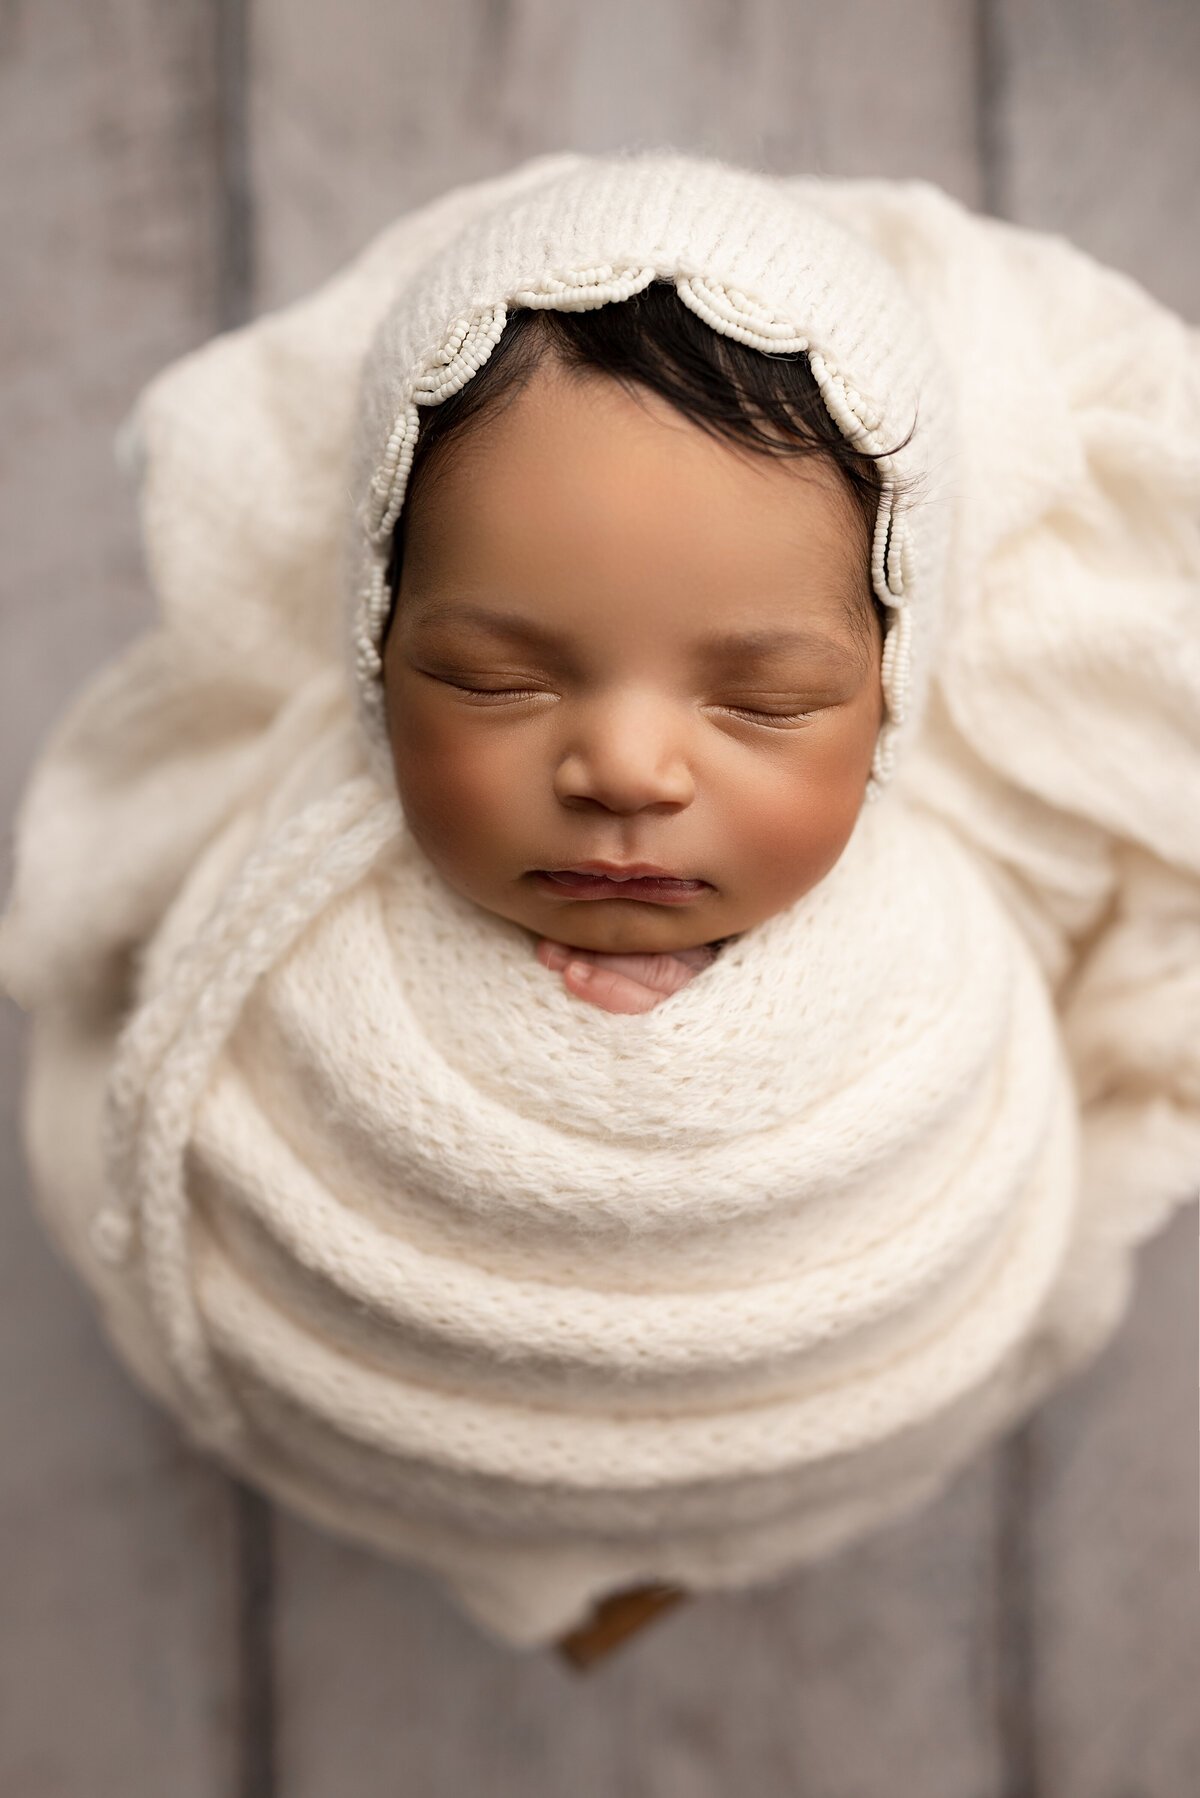 Fine art newborn photo captured by Philadelphia's best newborn photographer Katie Marshall. Baby swaddled in white with matching bonnet with scallop detail. Baby's fingers are peeking out of the top of the swaddle. Baby's long dark hair is peeking out of the bonnet.